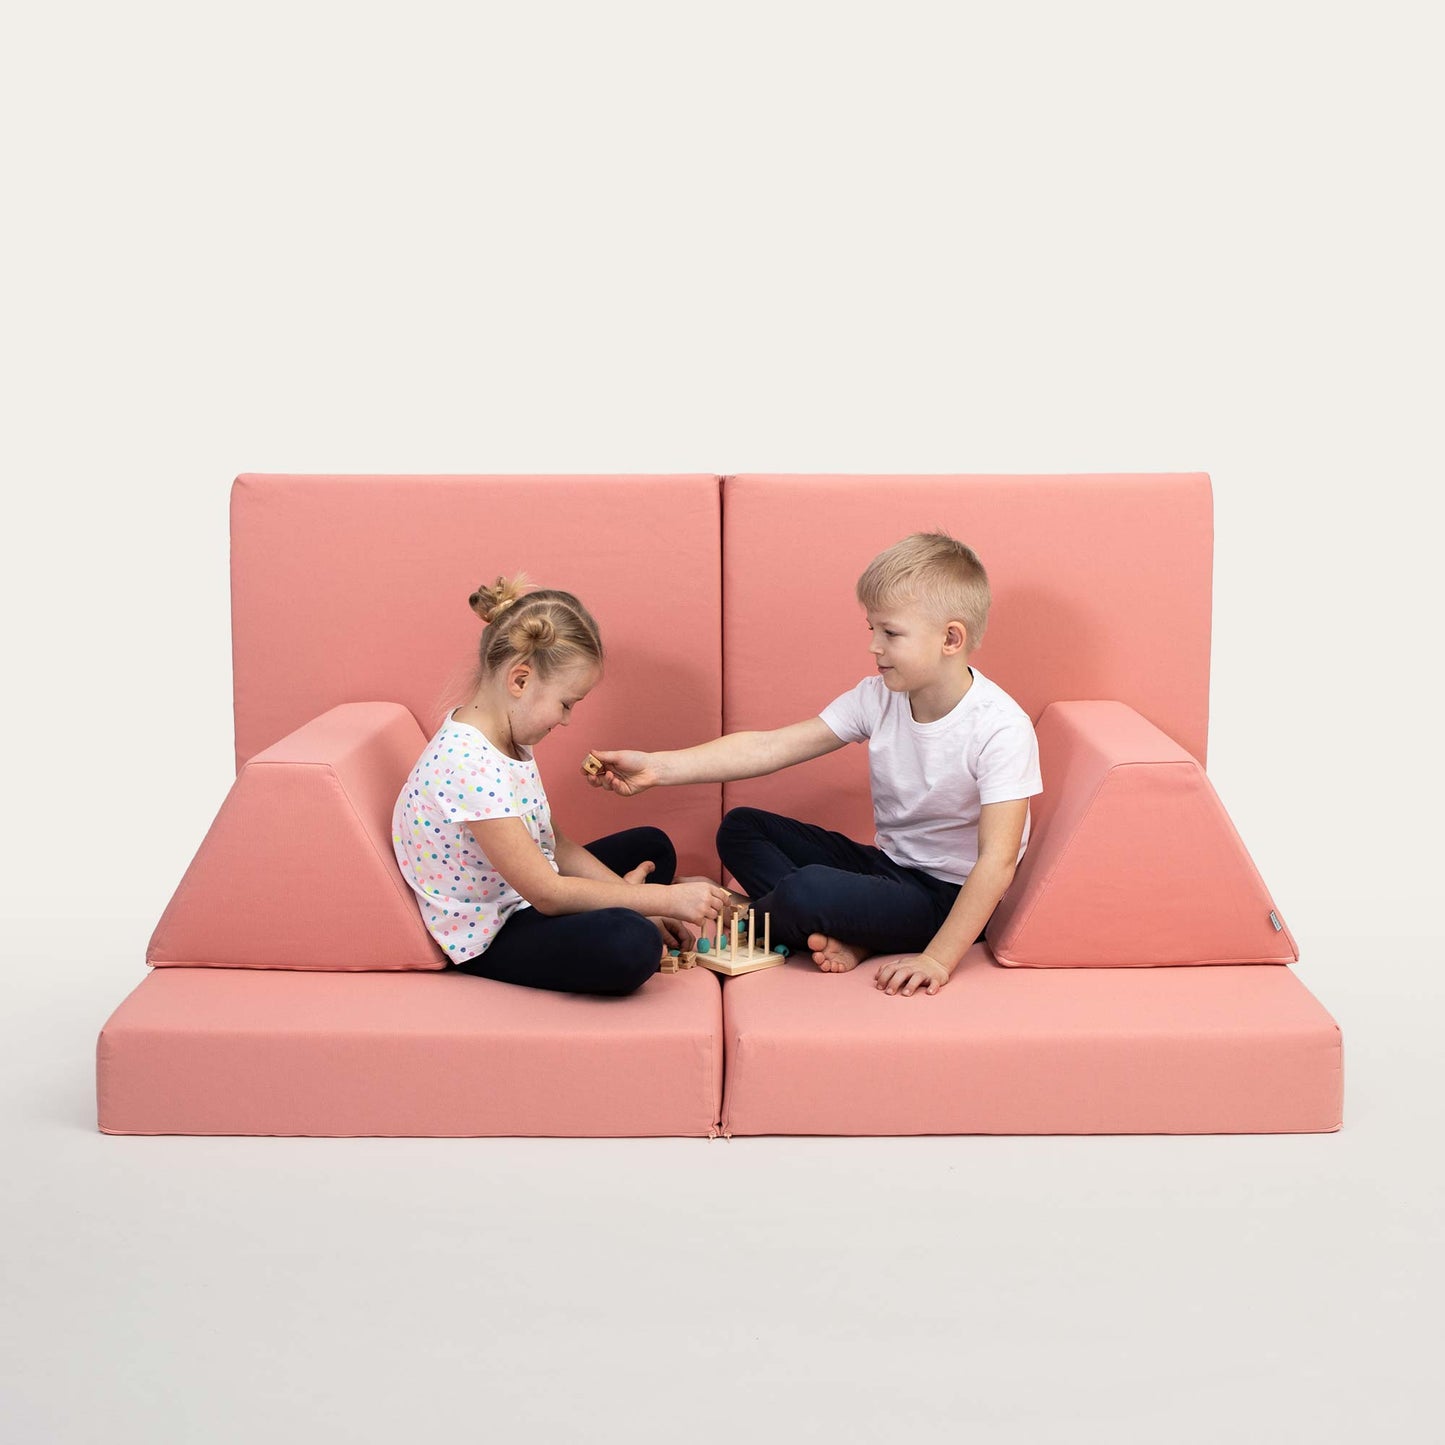 A boy and a girl playing on their Salmon pink Monboxy activity couch set for toddlers